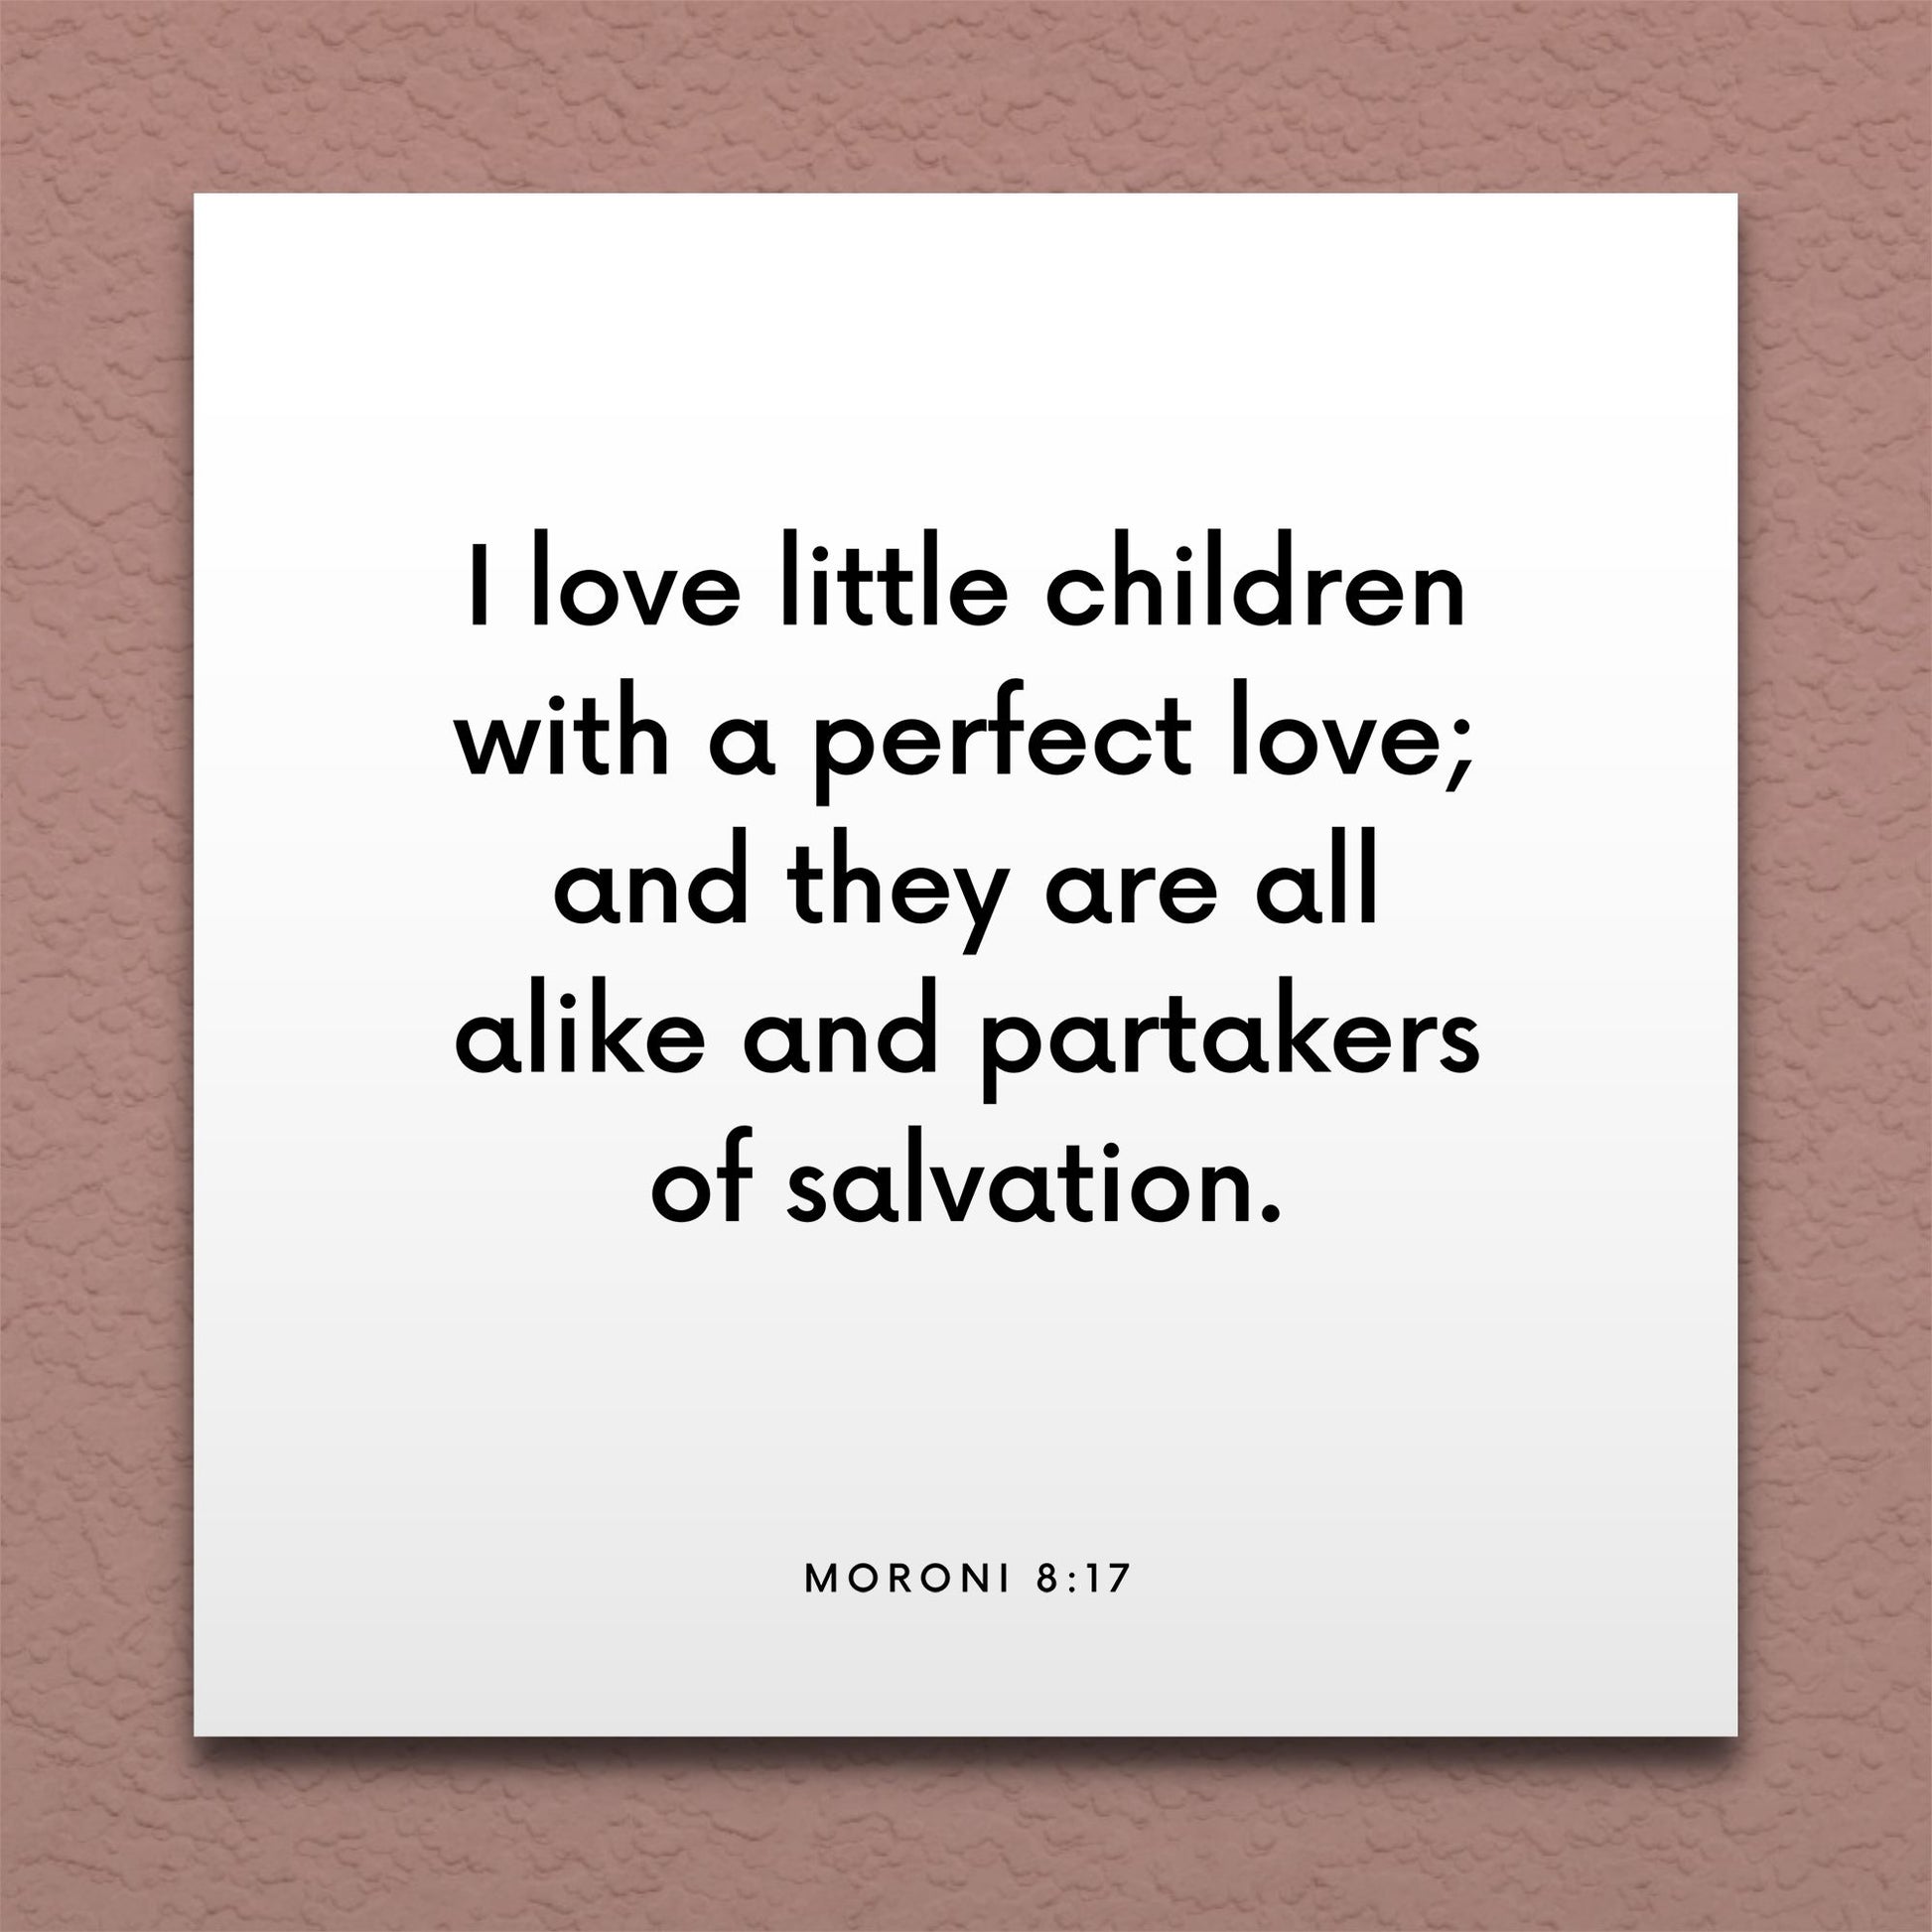 Wall-mounted scripture tile for Moroni 8:17 - "I love little children with a perfect love"